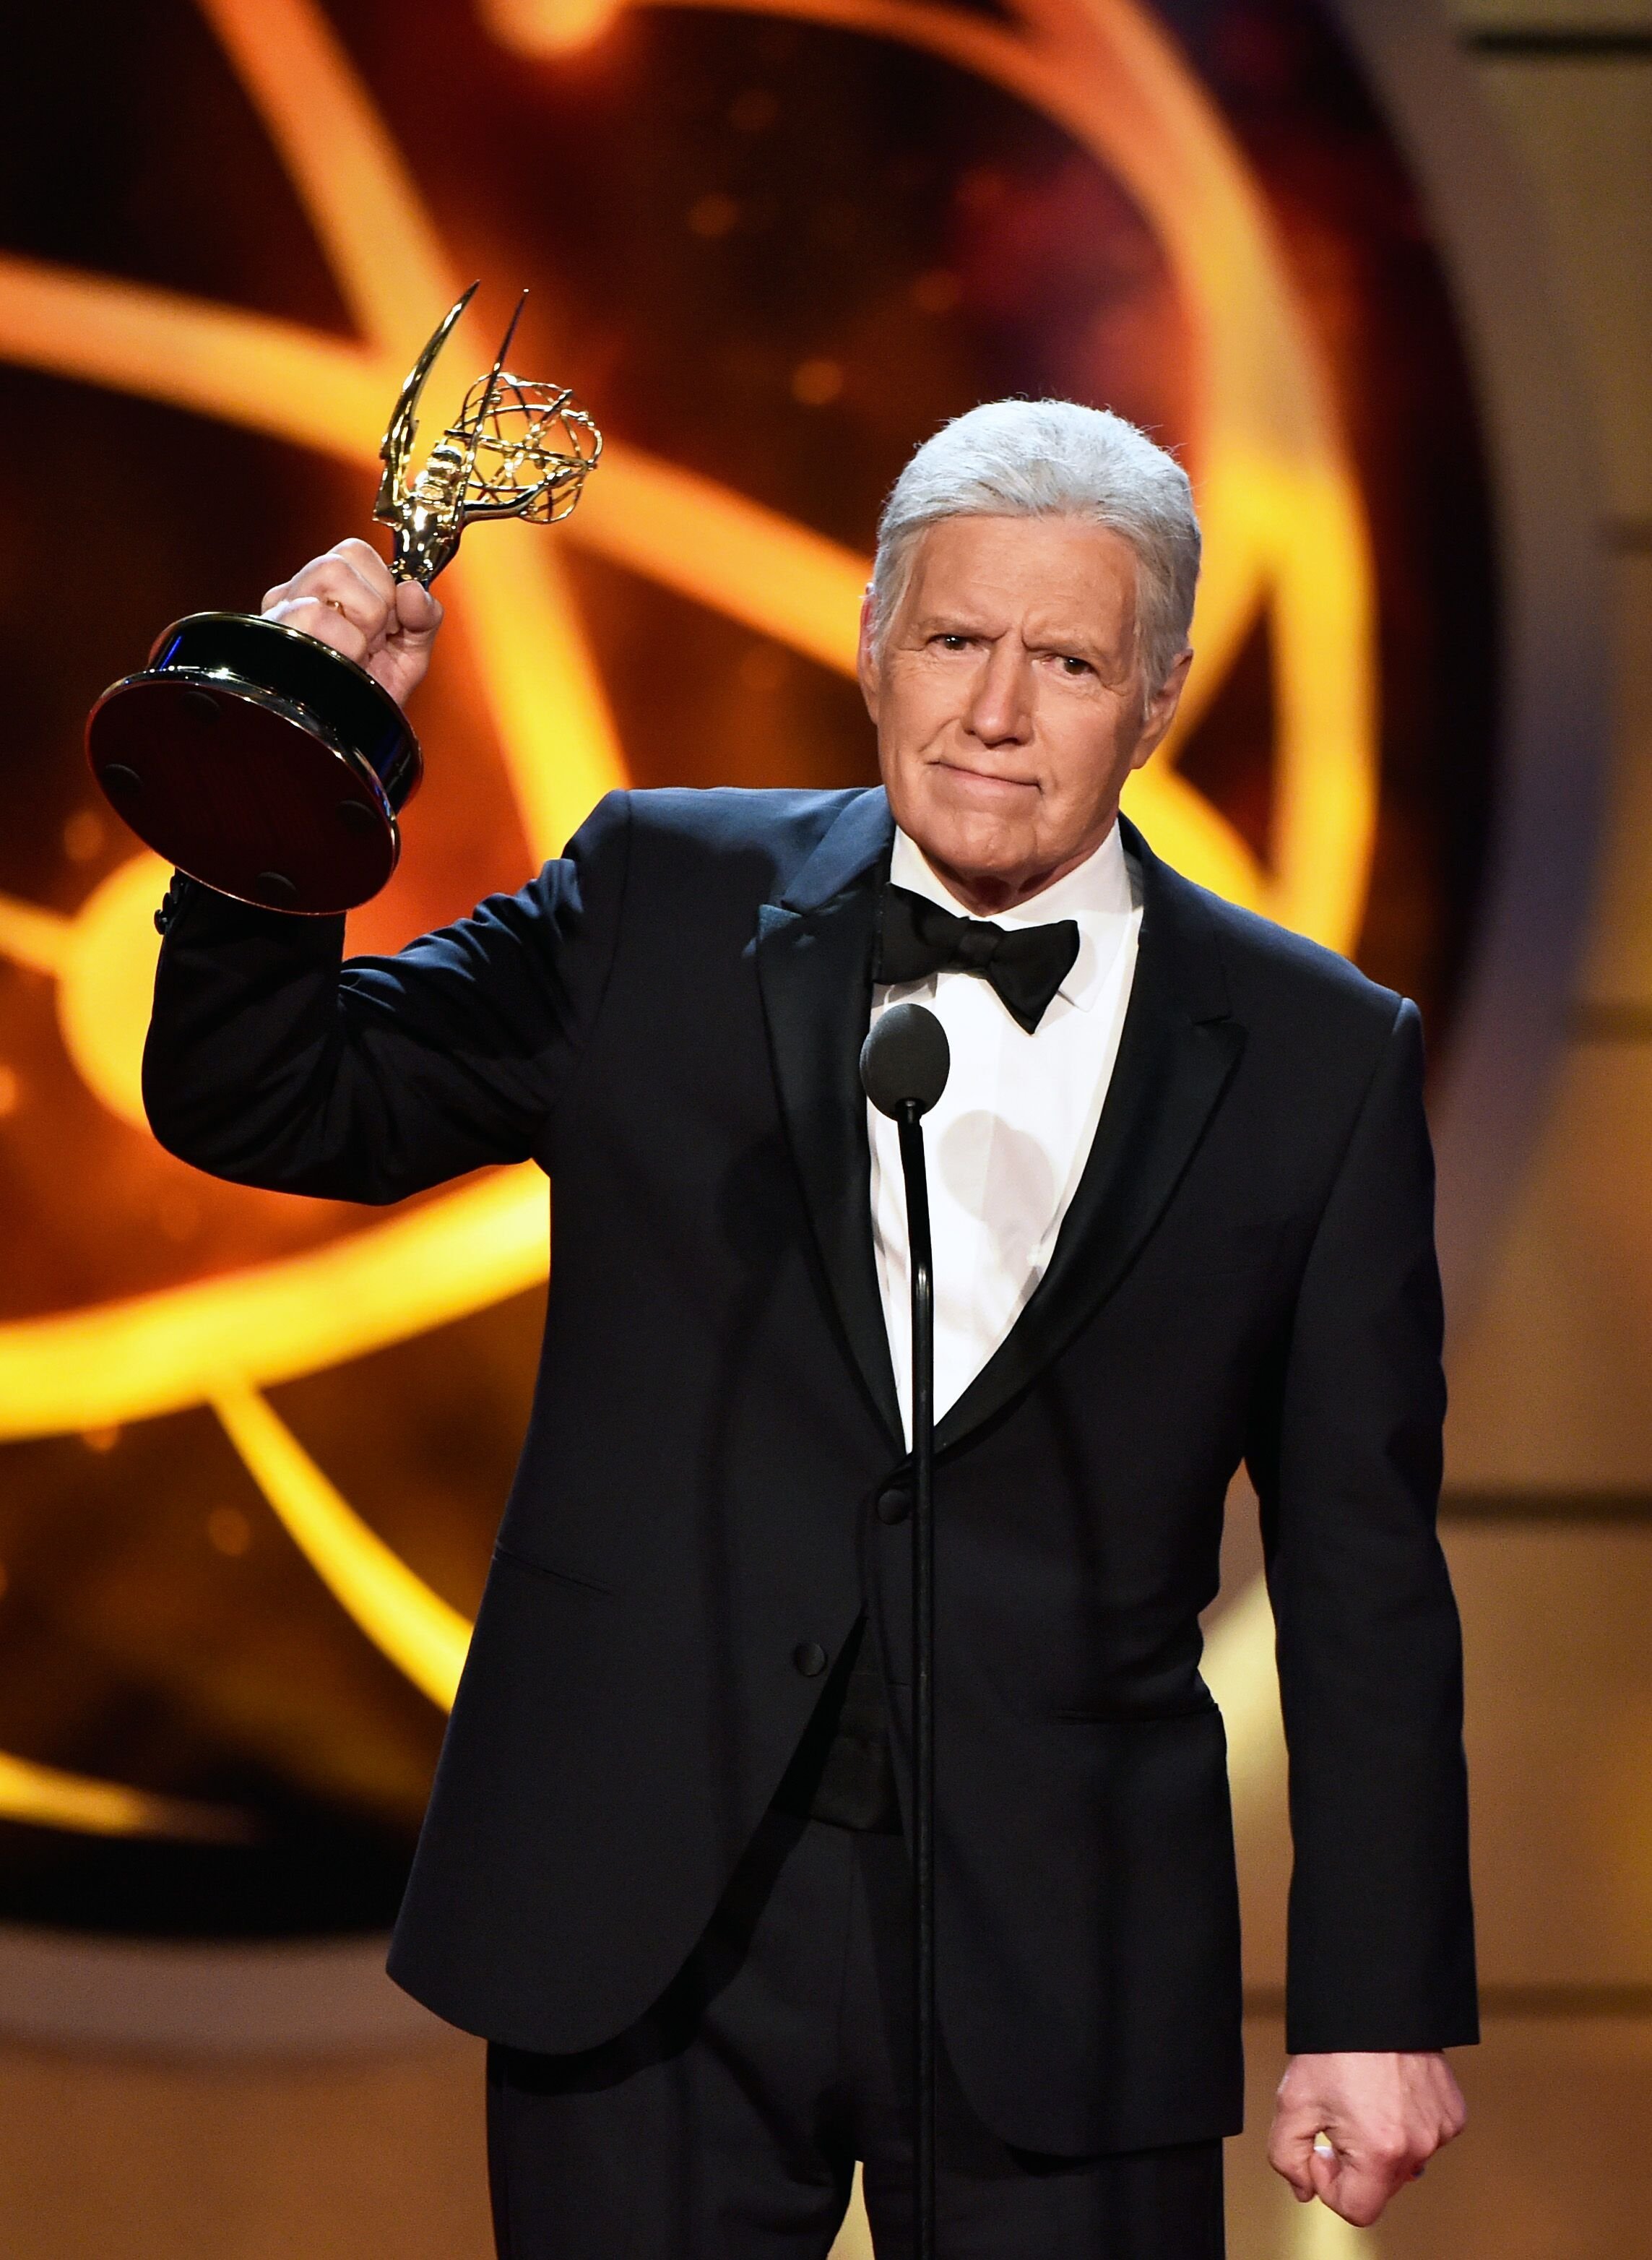 Alex Trebek accepts a Daytime Emmy Award for Outstanding Game Show Host. | Source: Getty Images